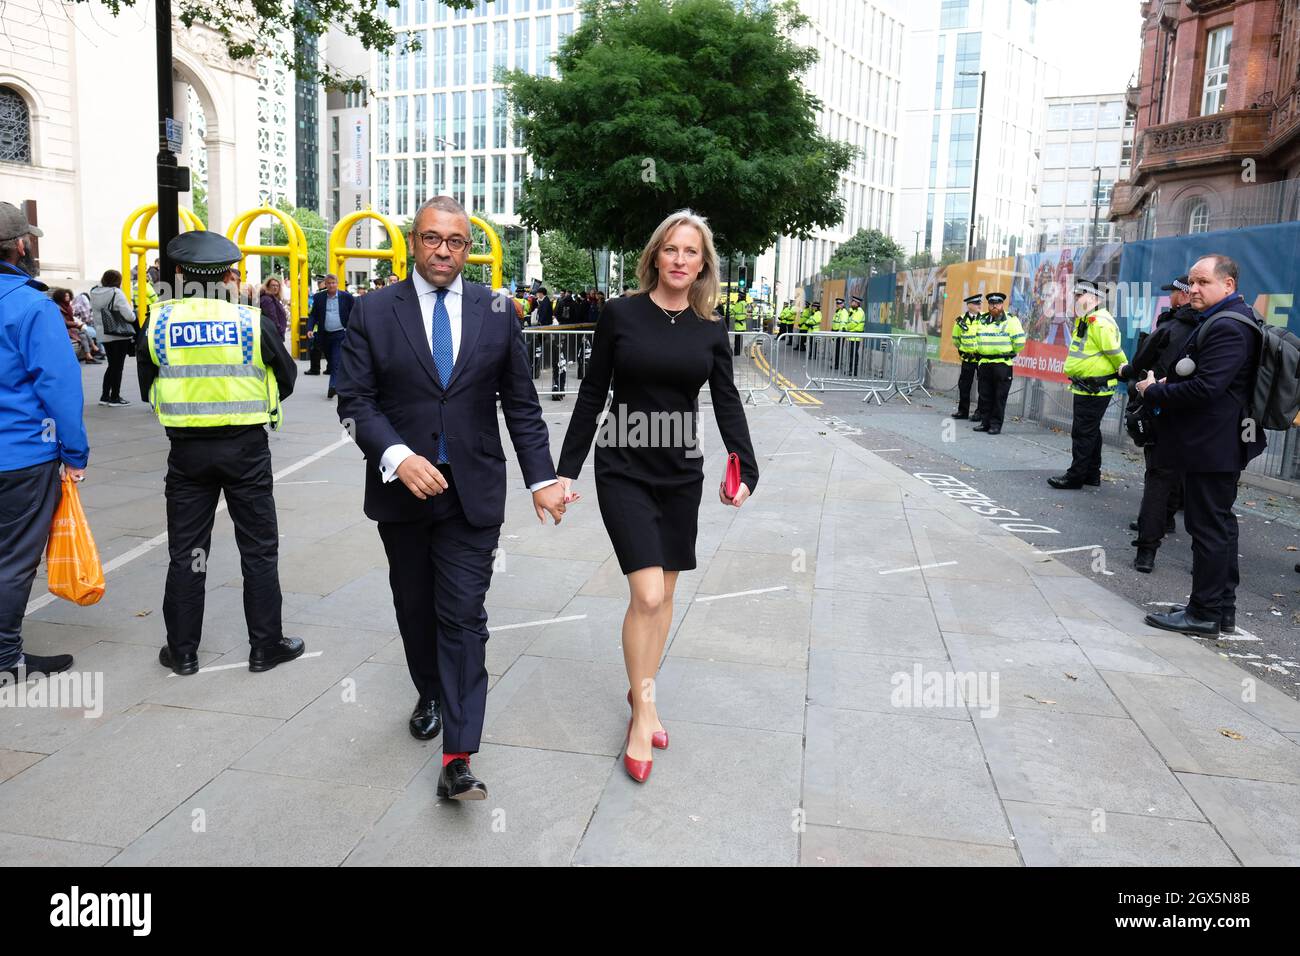 Manchester, UK – Monday 4th October 2021 – Conservative MP James Cleverly outside the Conservative Party Conference in Manchester. Photo Steven May / Alamy Live News Stock Photo